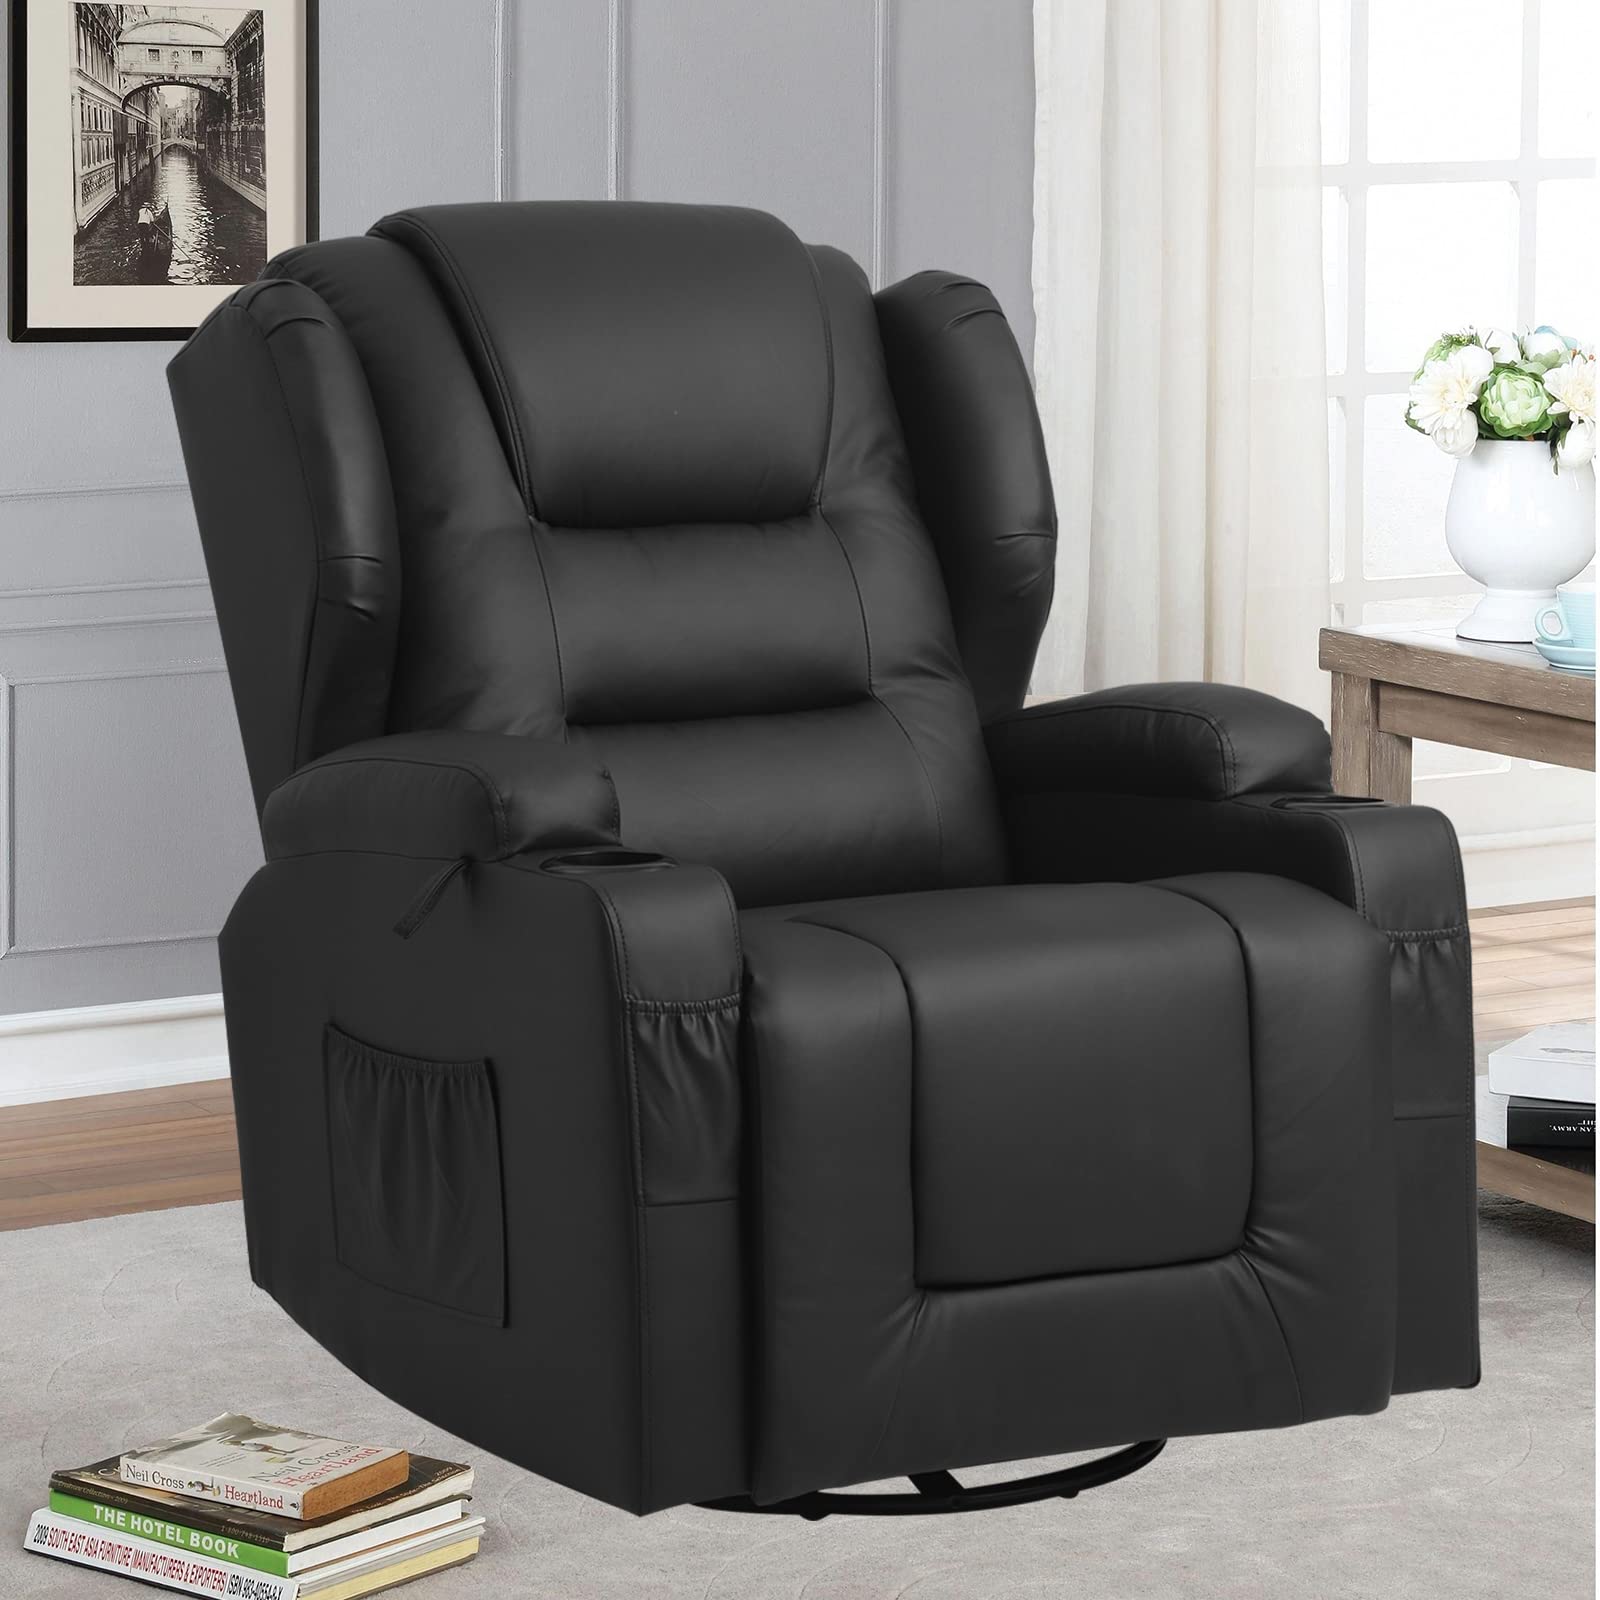 ETAGERIA Swivel Rocker Recliner Nursery Rocking Chairs 360 Degree, Manual Glider Recliner Chairs for Living Room,Upholstered Swi